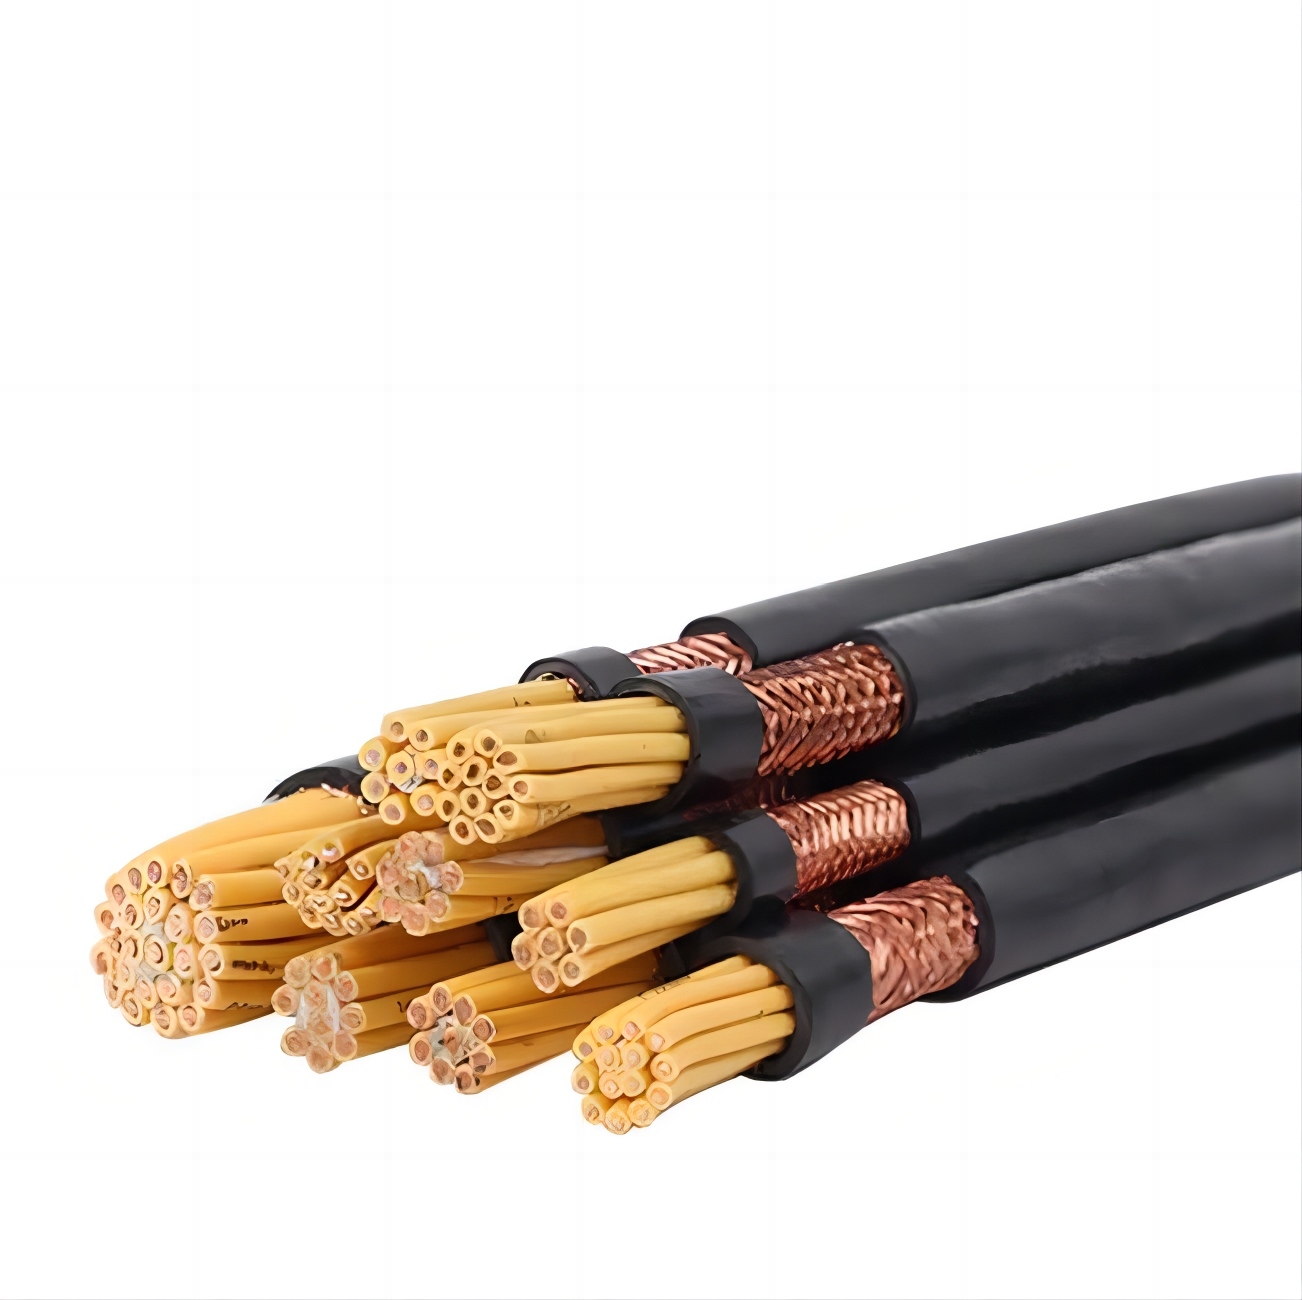 PVC insulated control cable